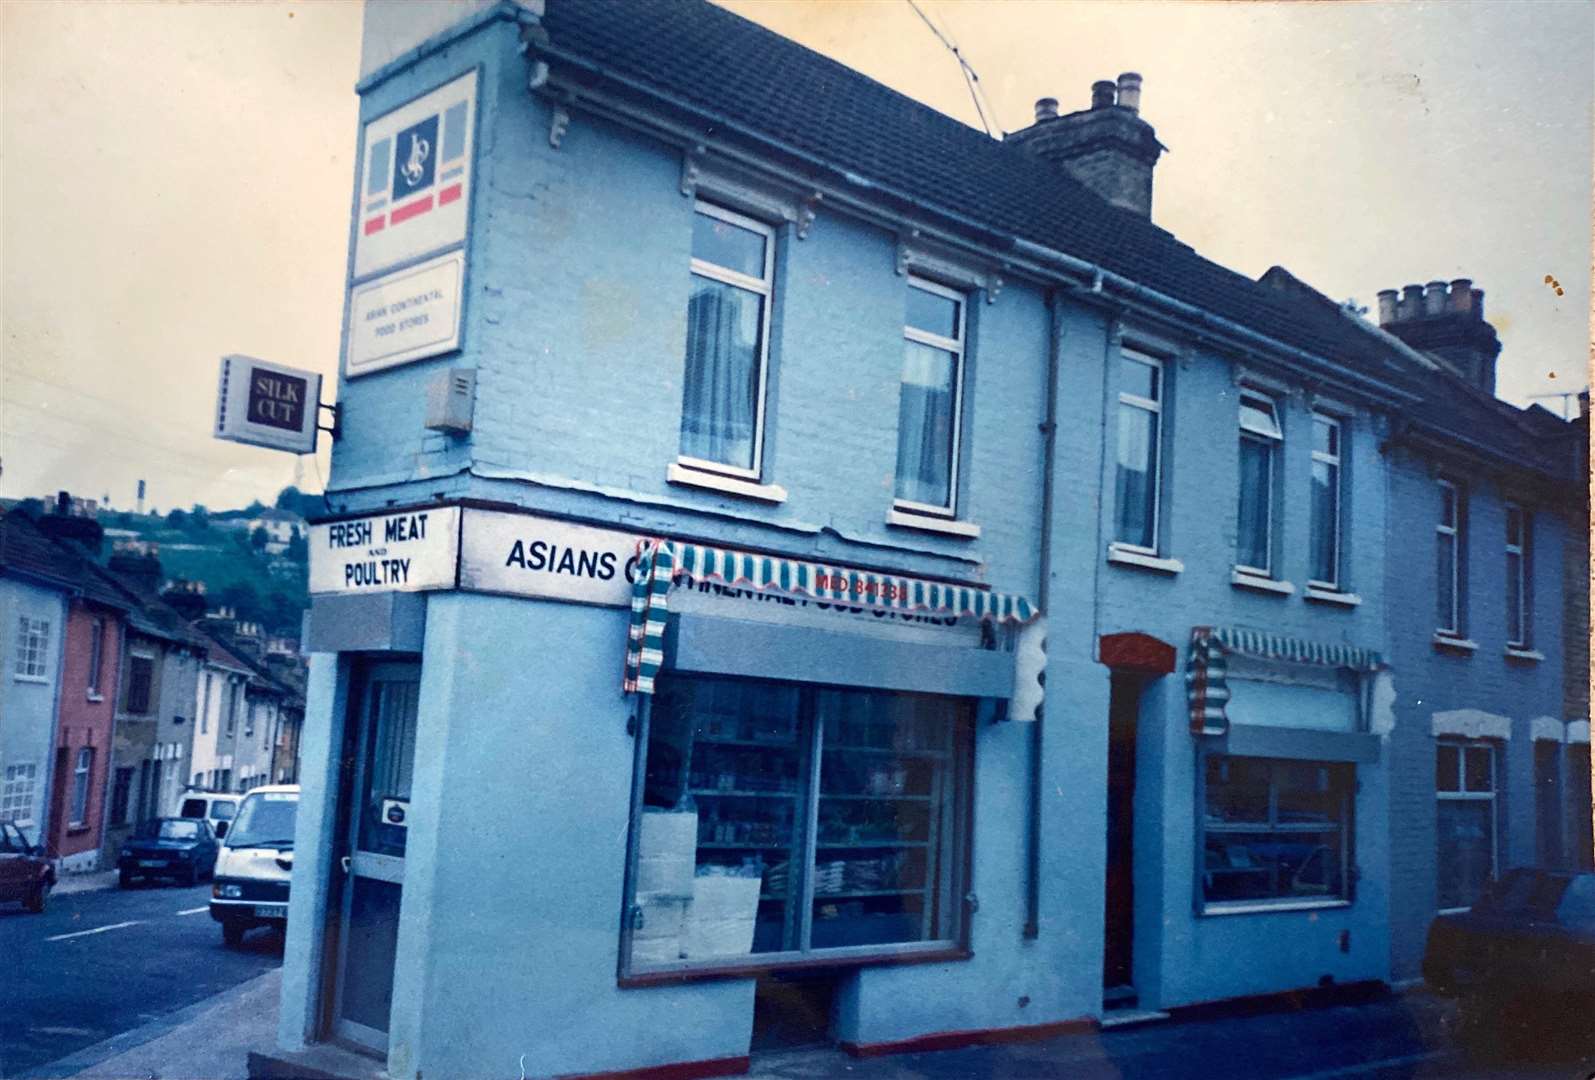 One of Medway's first halal butchers in Salisbury Road, Luton